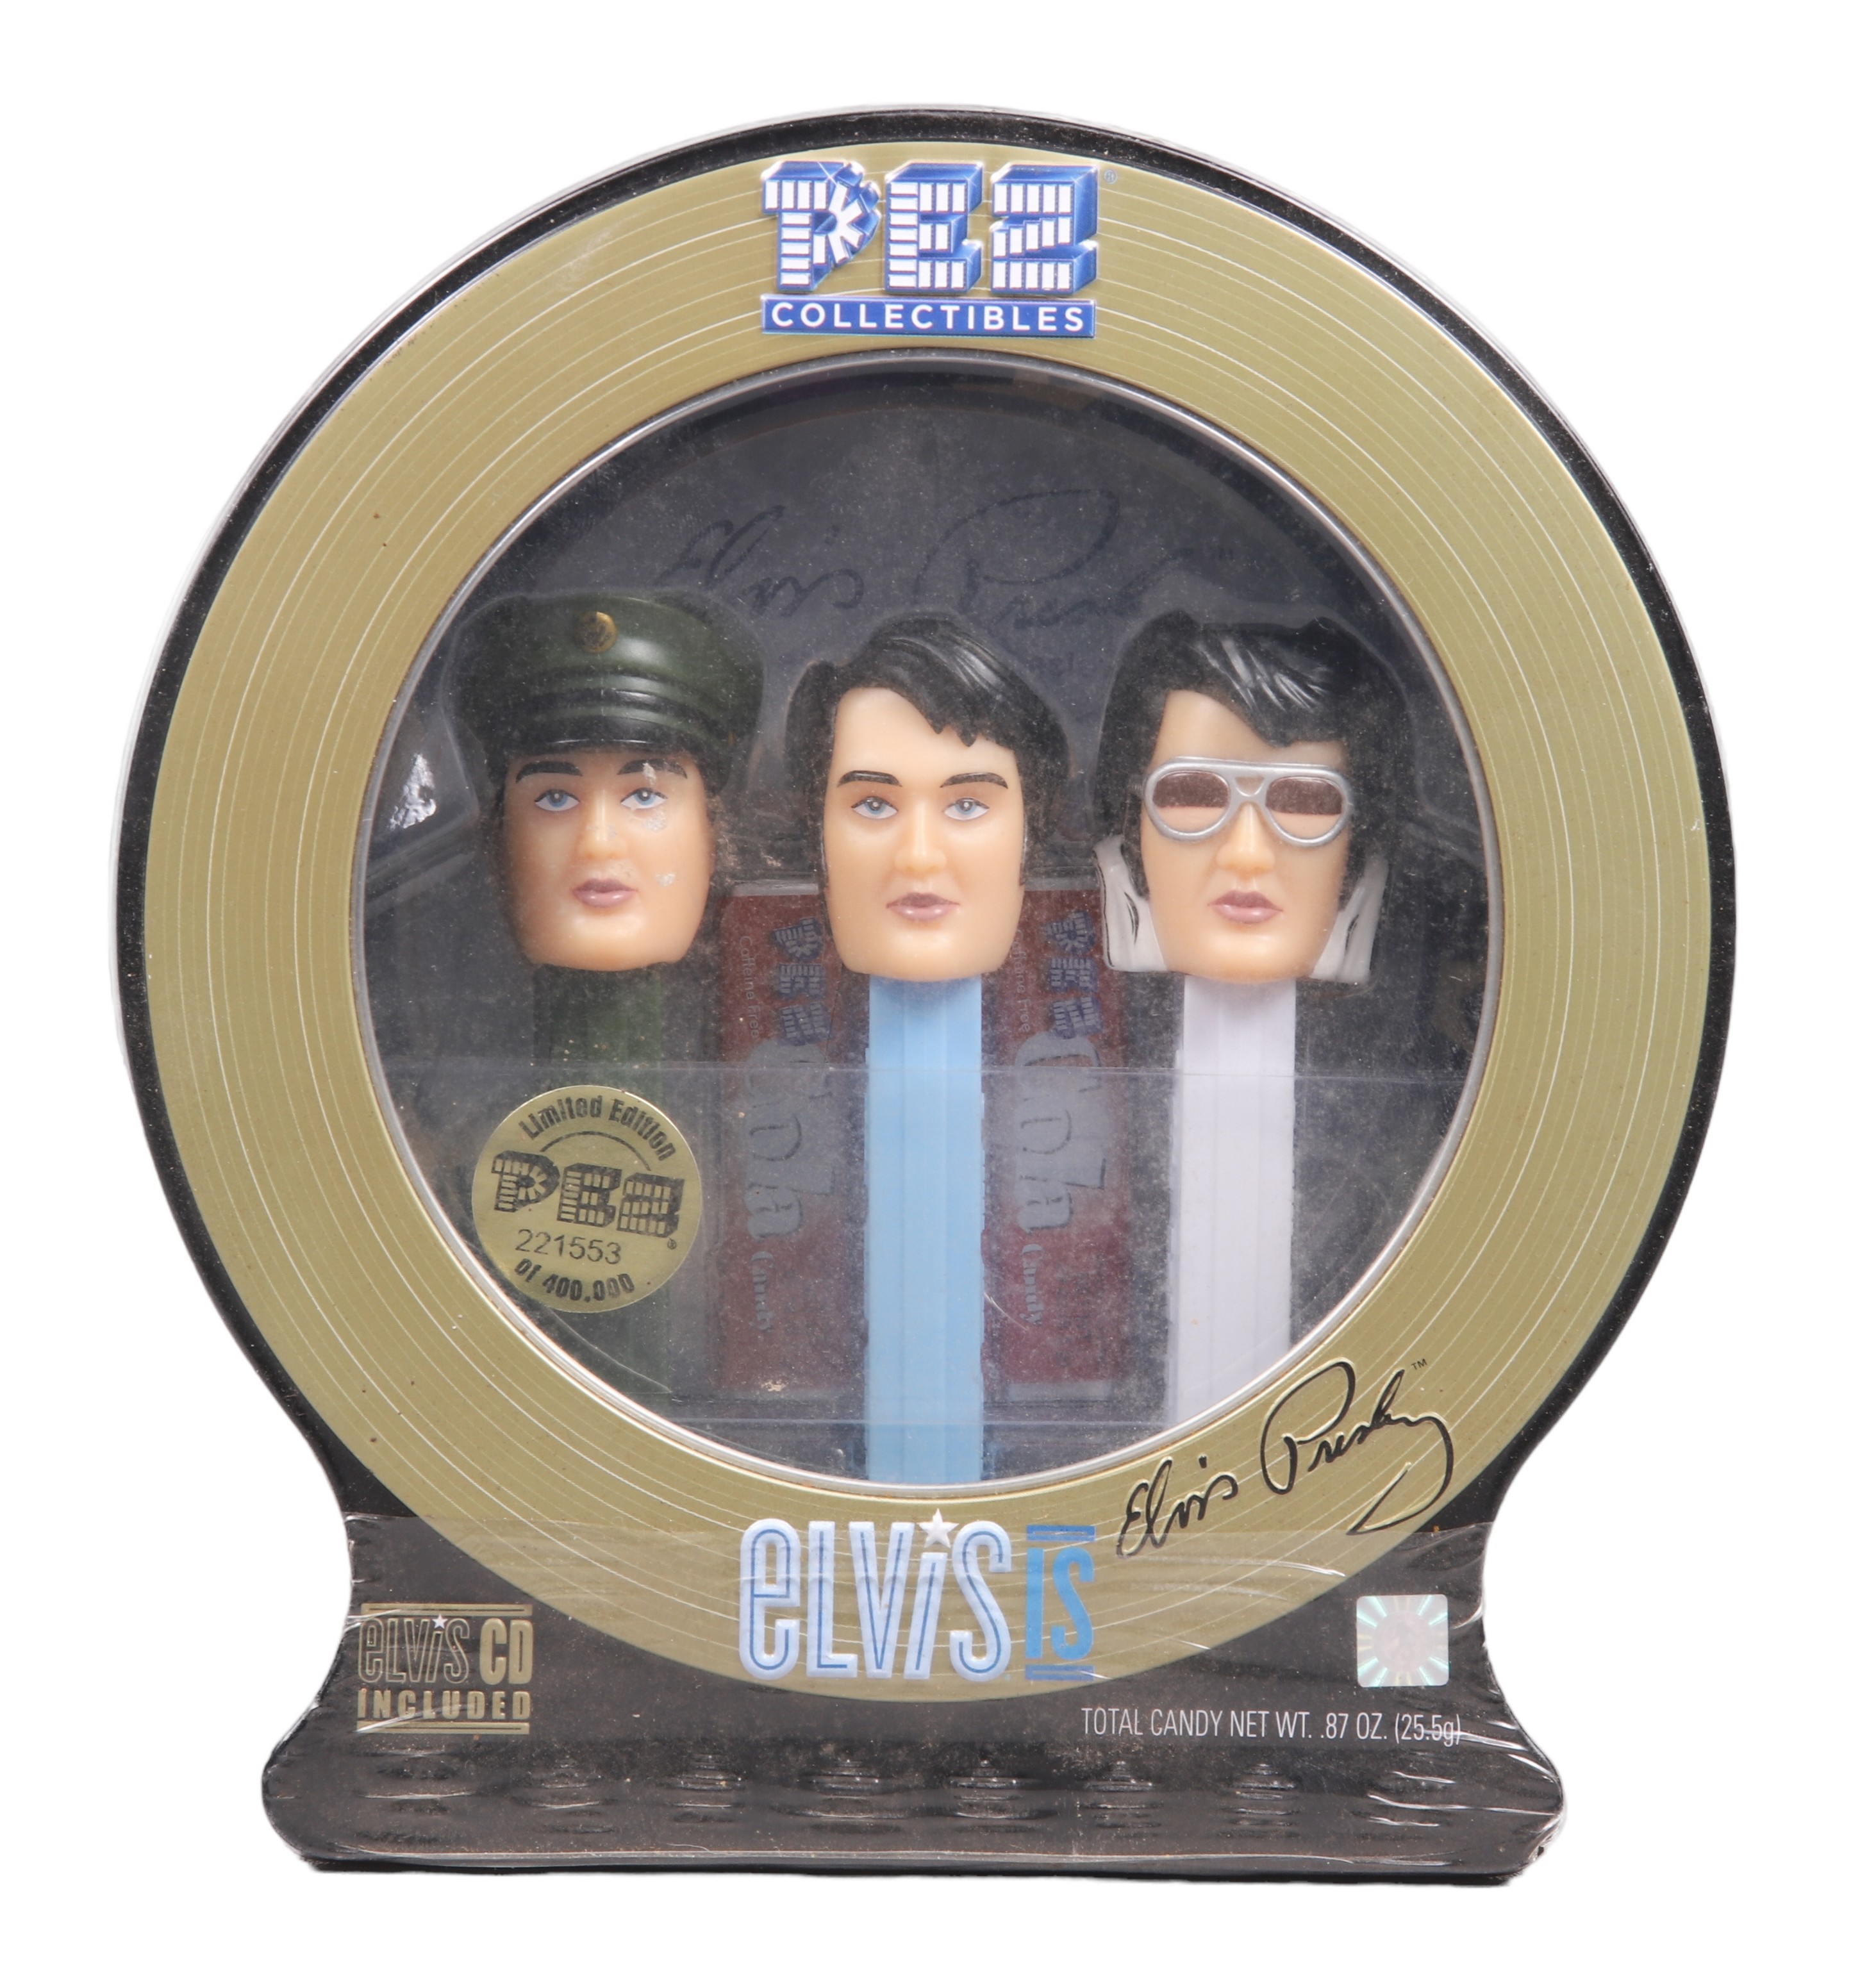 Elvis pez collection, with CD in collectors